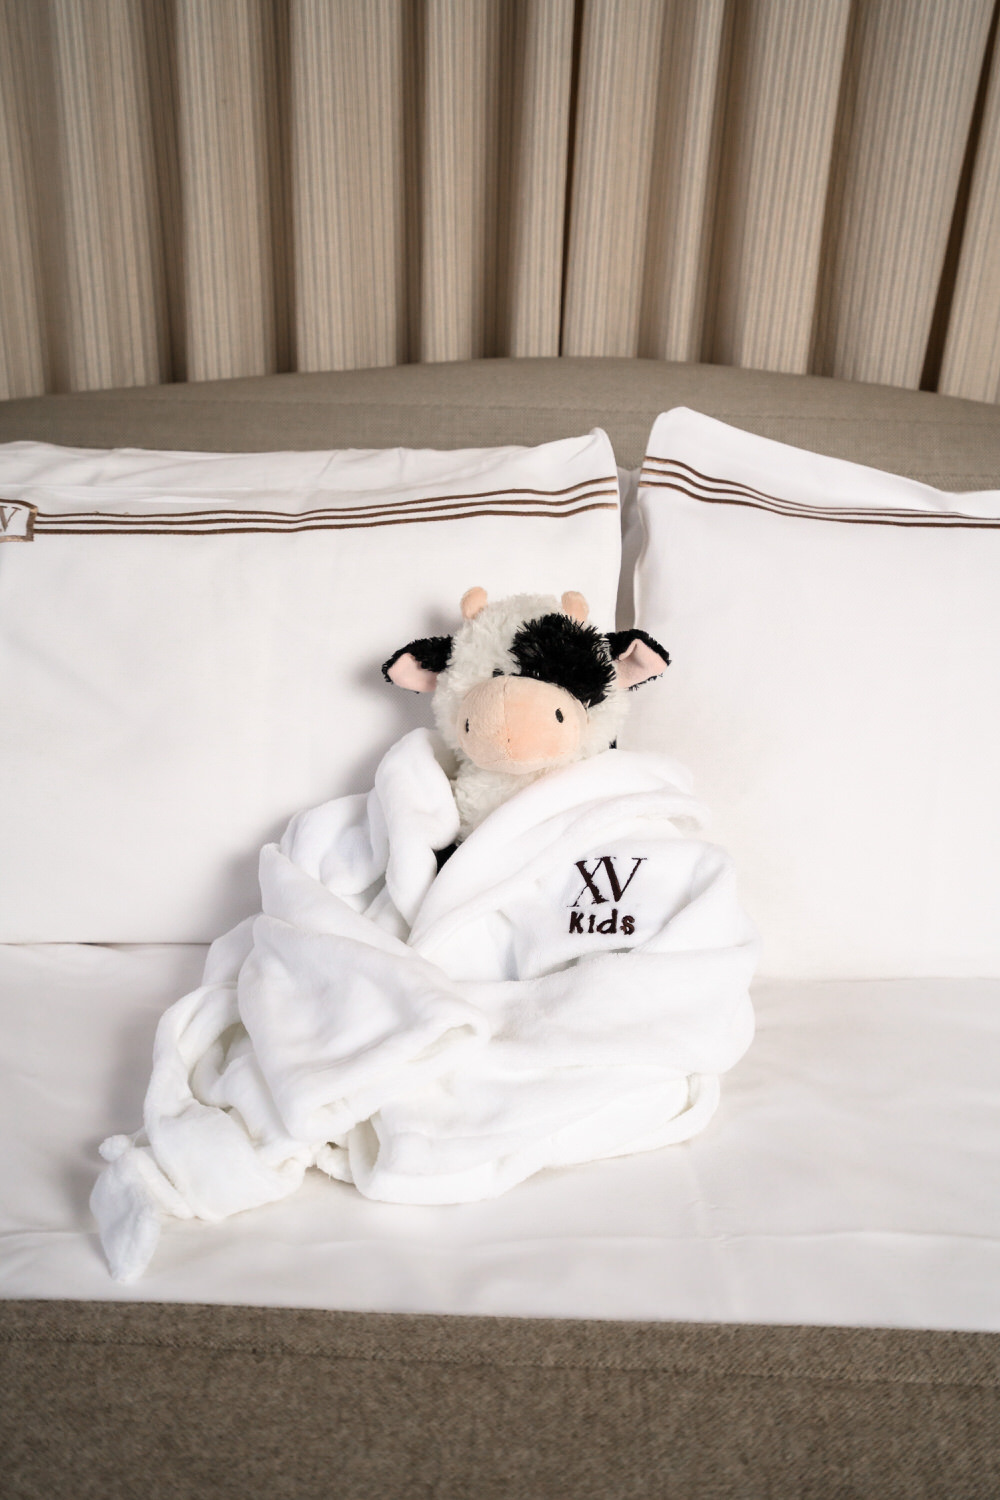 Stuffed animal cow dressed in an XV Beacon kids robe and sitting on the bed